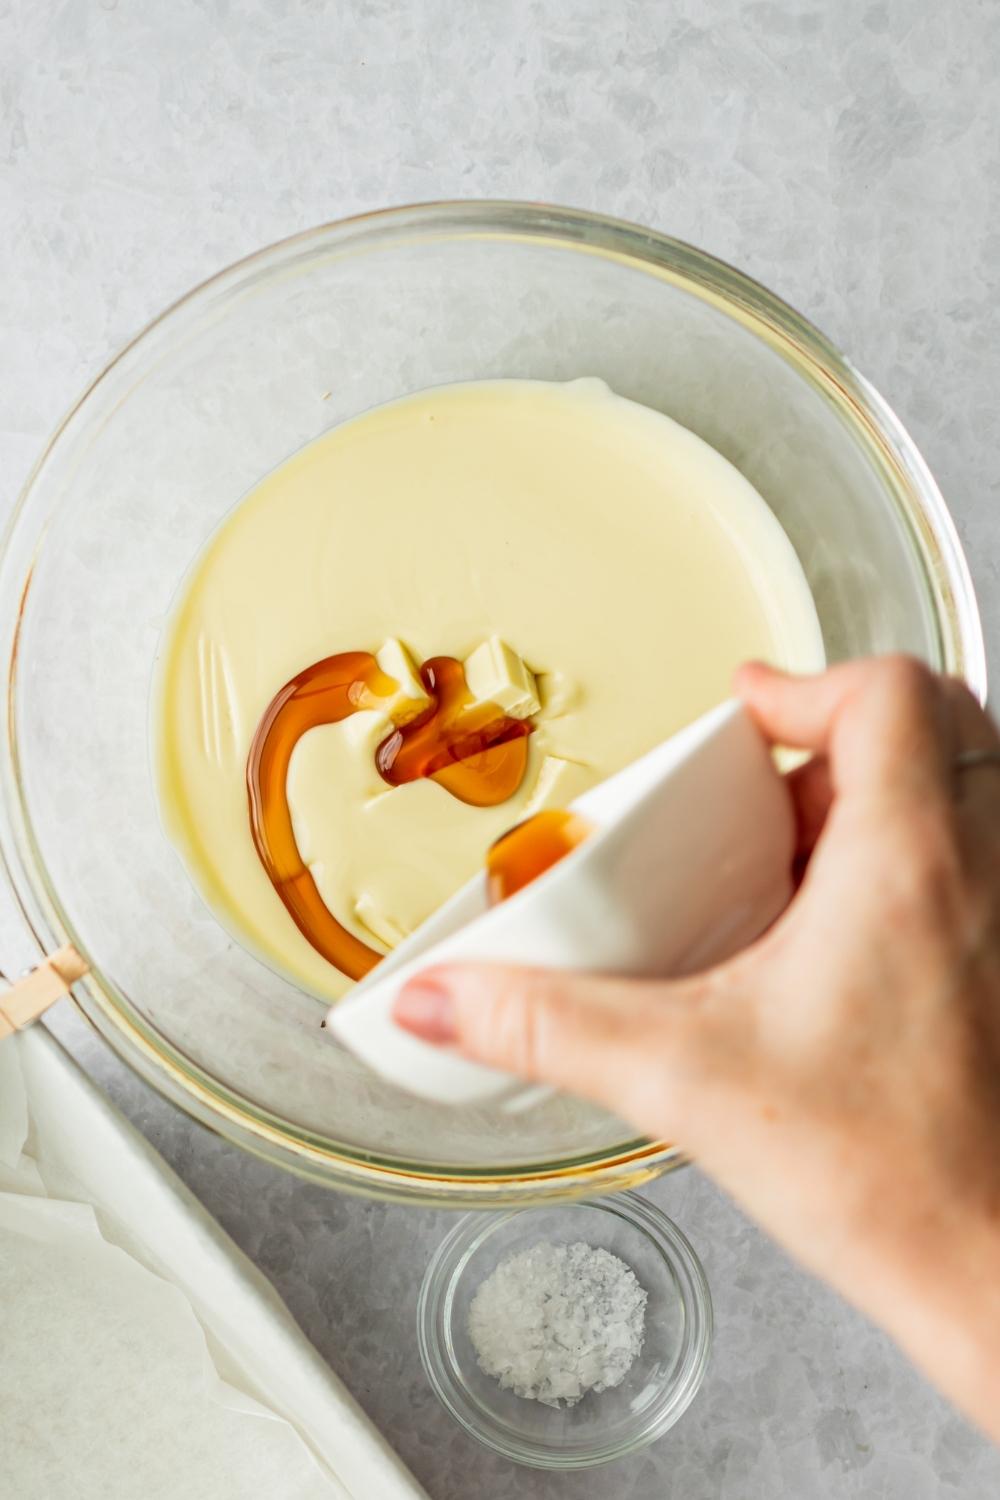 A medium bowl with melted white chocolate and a hand holding a small bowl pouring pure maple syrup into it.